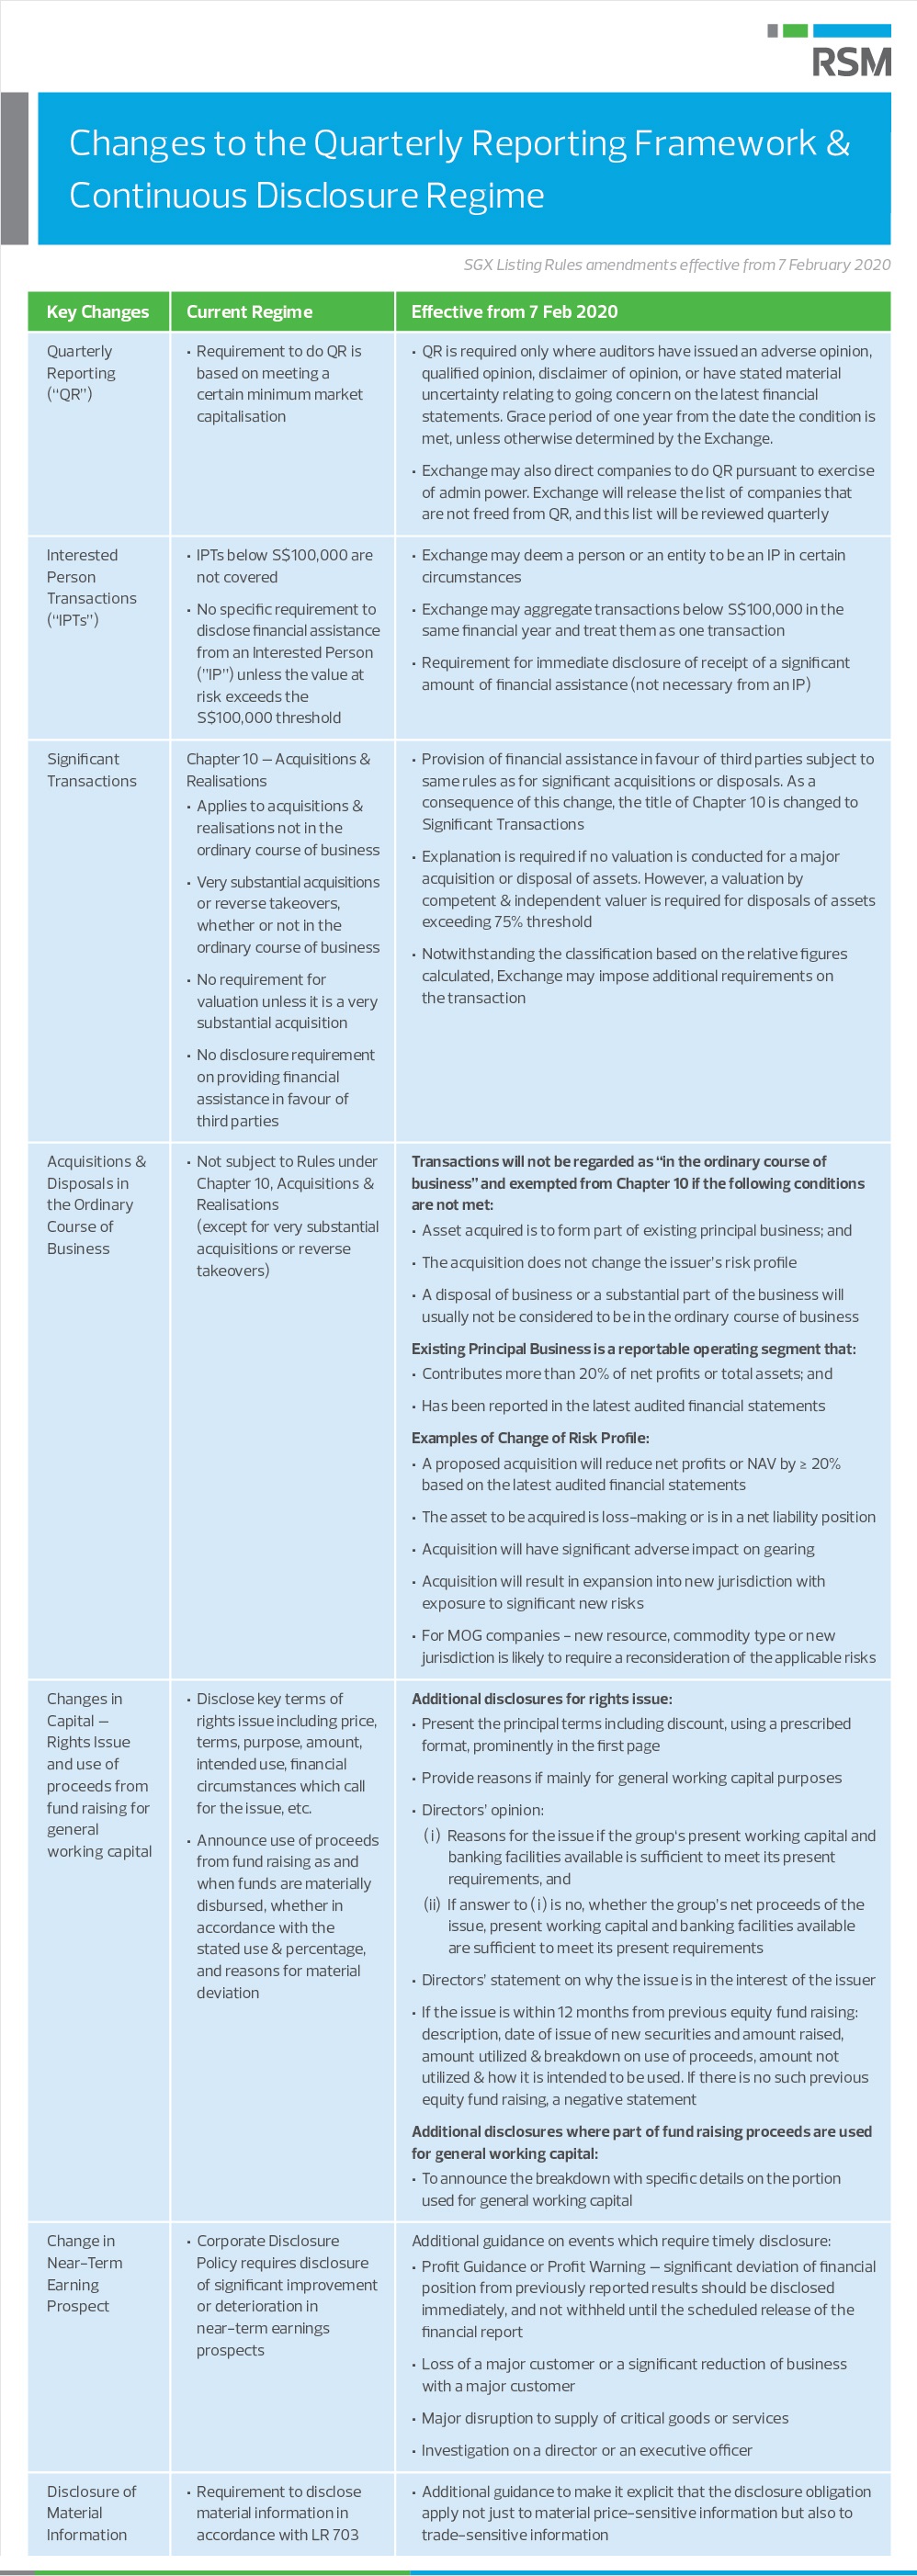 Table showcasing the key changes to the Quarterly Reporting Framework and Continuos Disclosure Regime